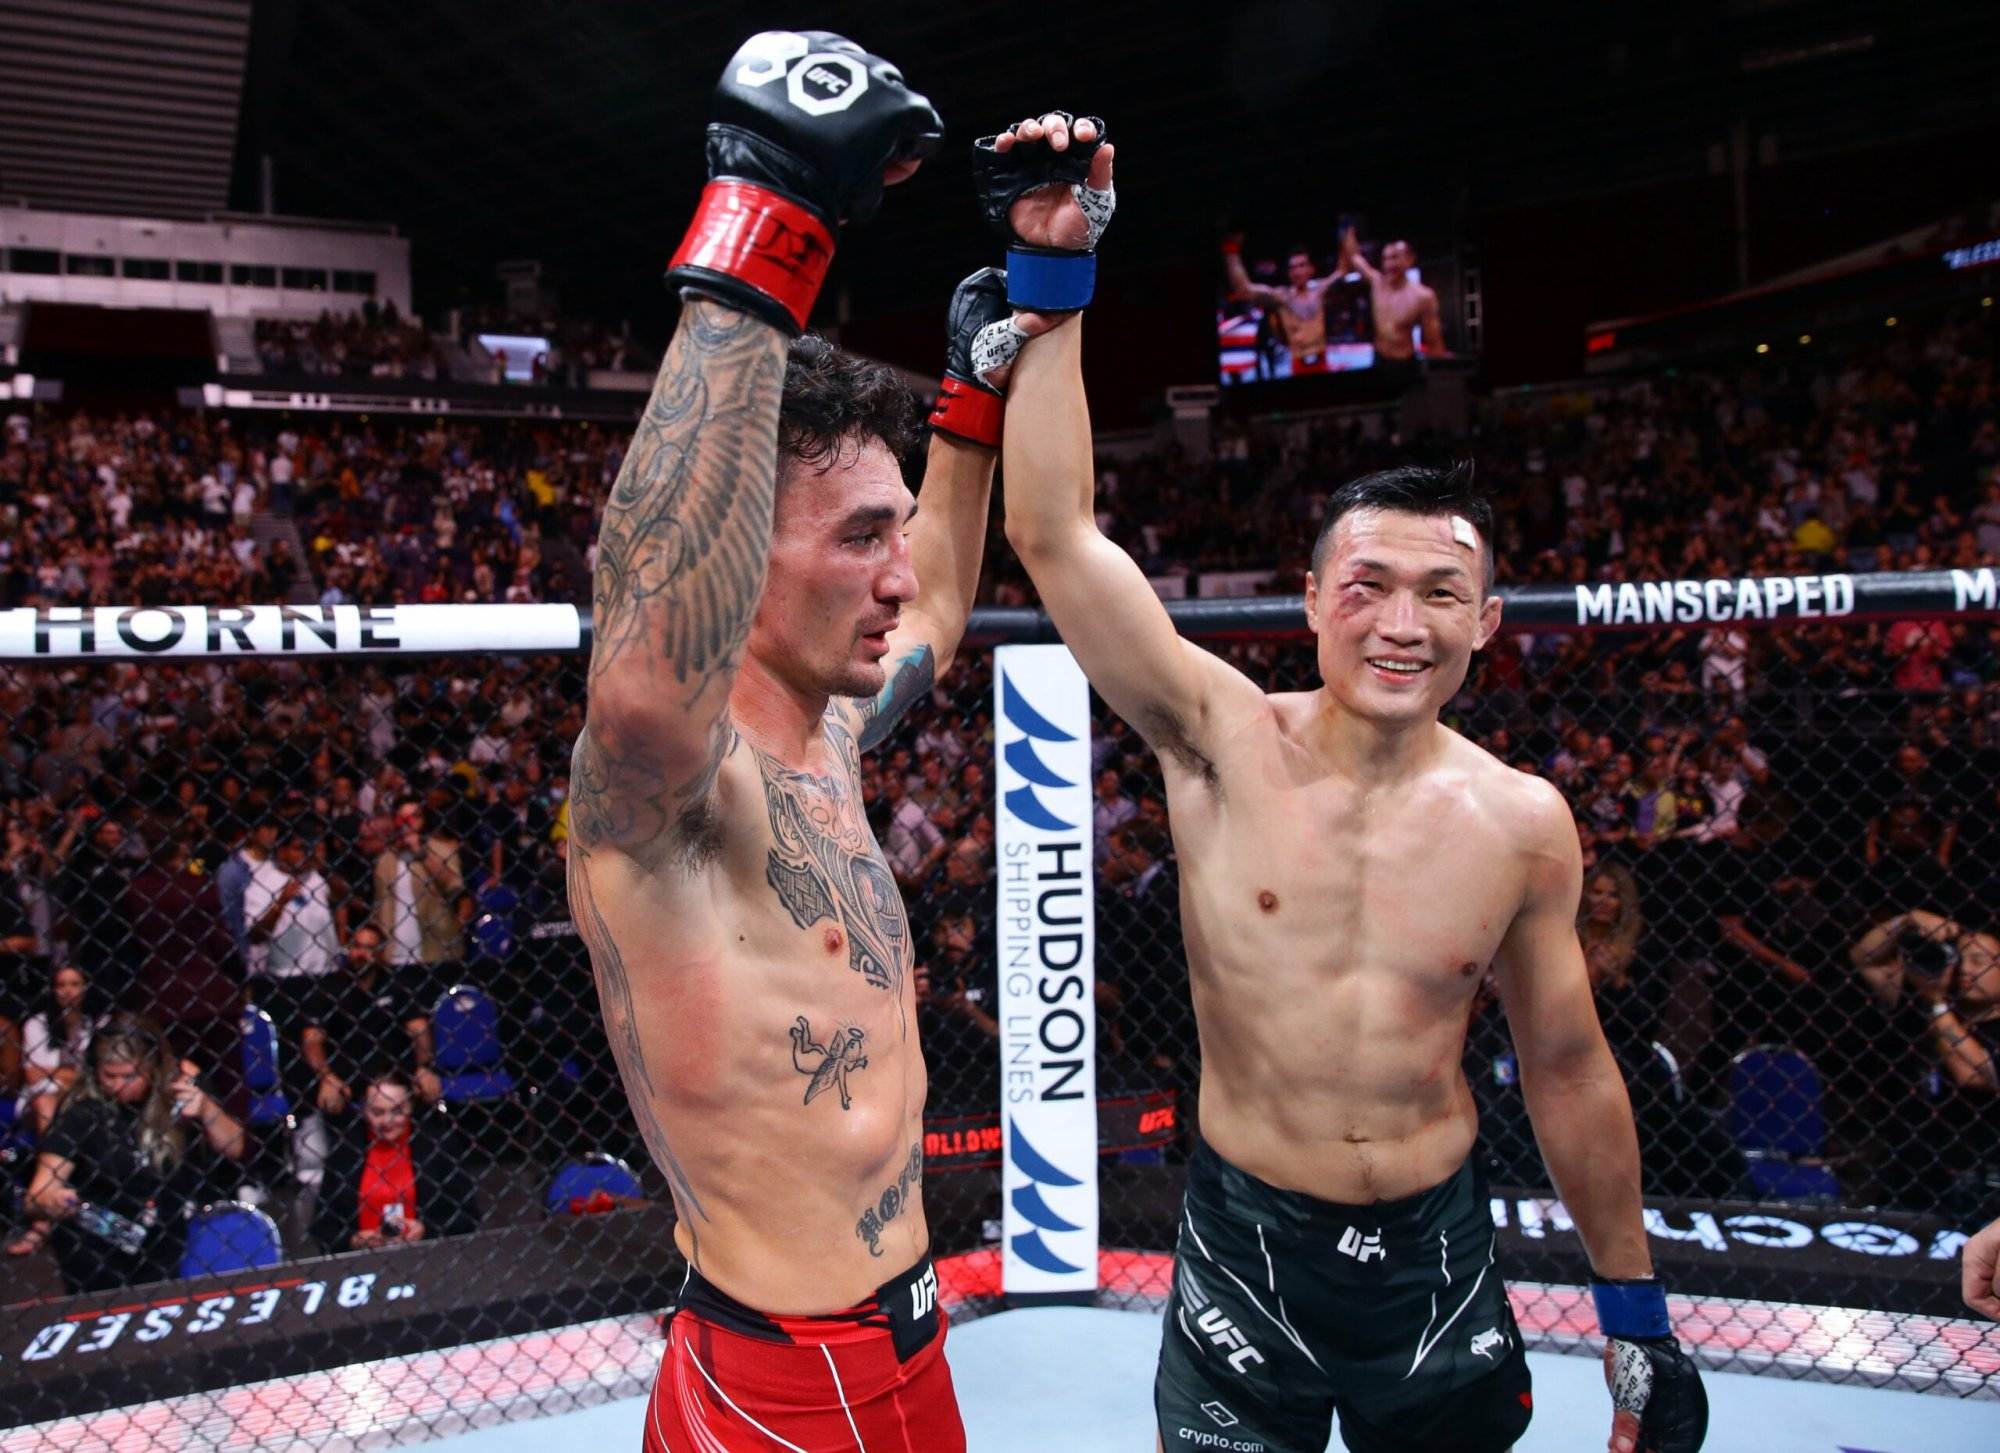 Max Holloway Sends The Korean Zombie Into Retirement With A Third-Round Stoppage